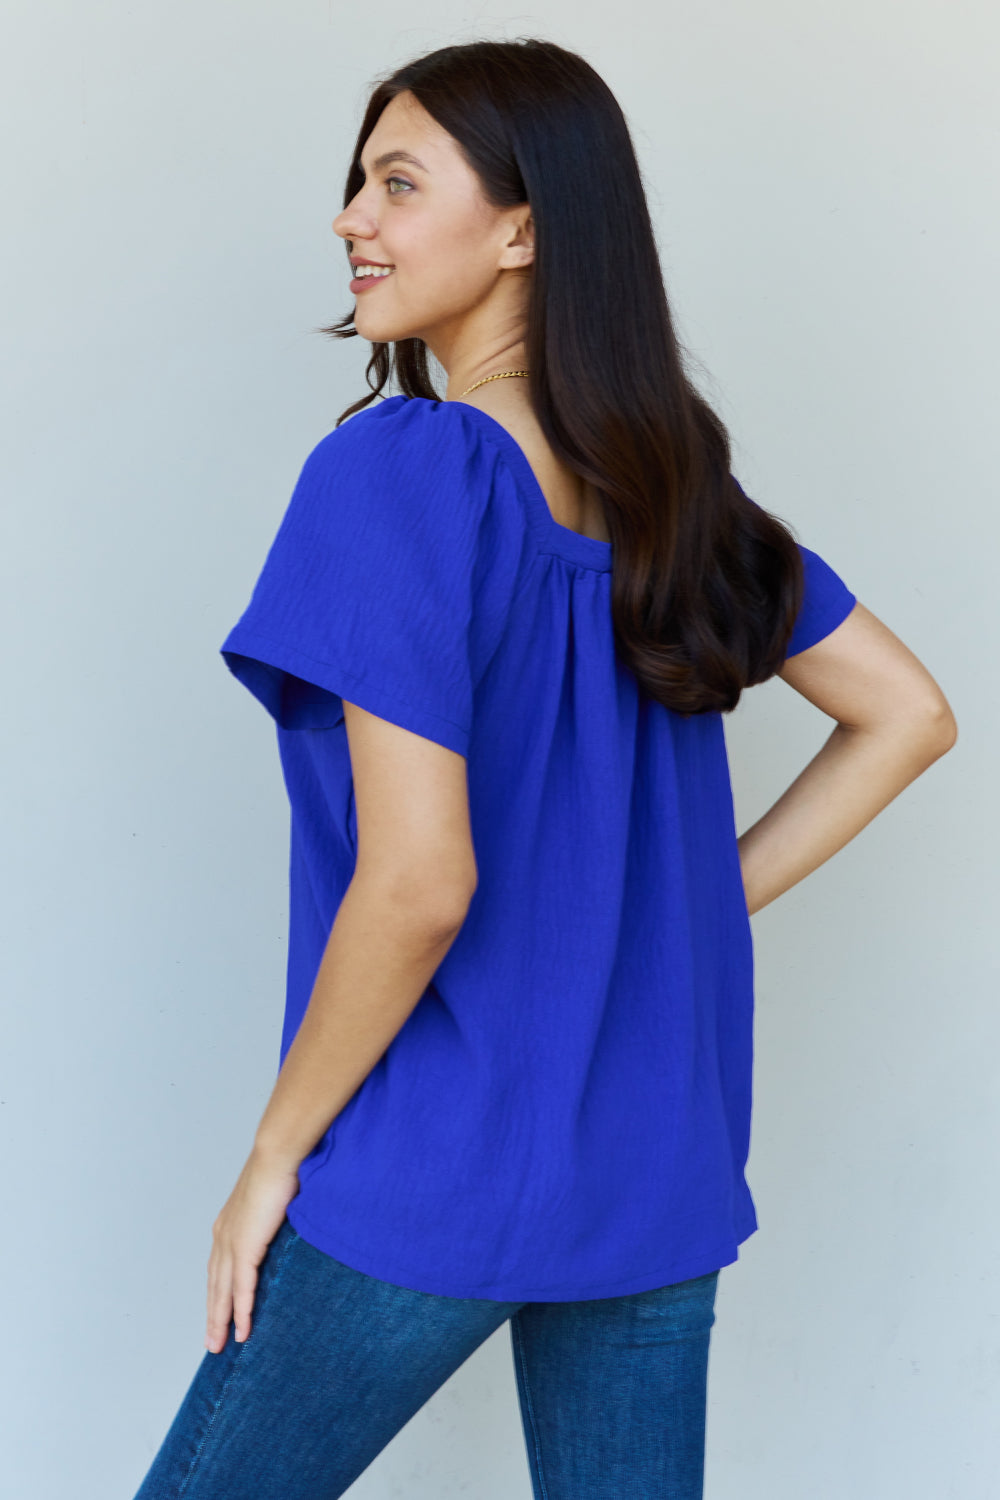 Keep Me Close Square Neck Short Sleeve Blouse in Royal - Women’s Clothing & Accessories - Dresses - 2 - 2024